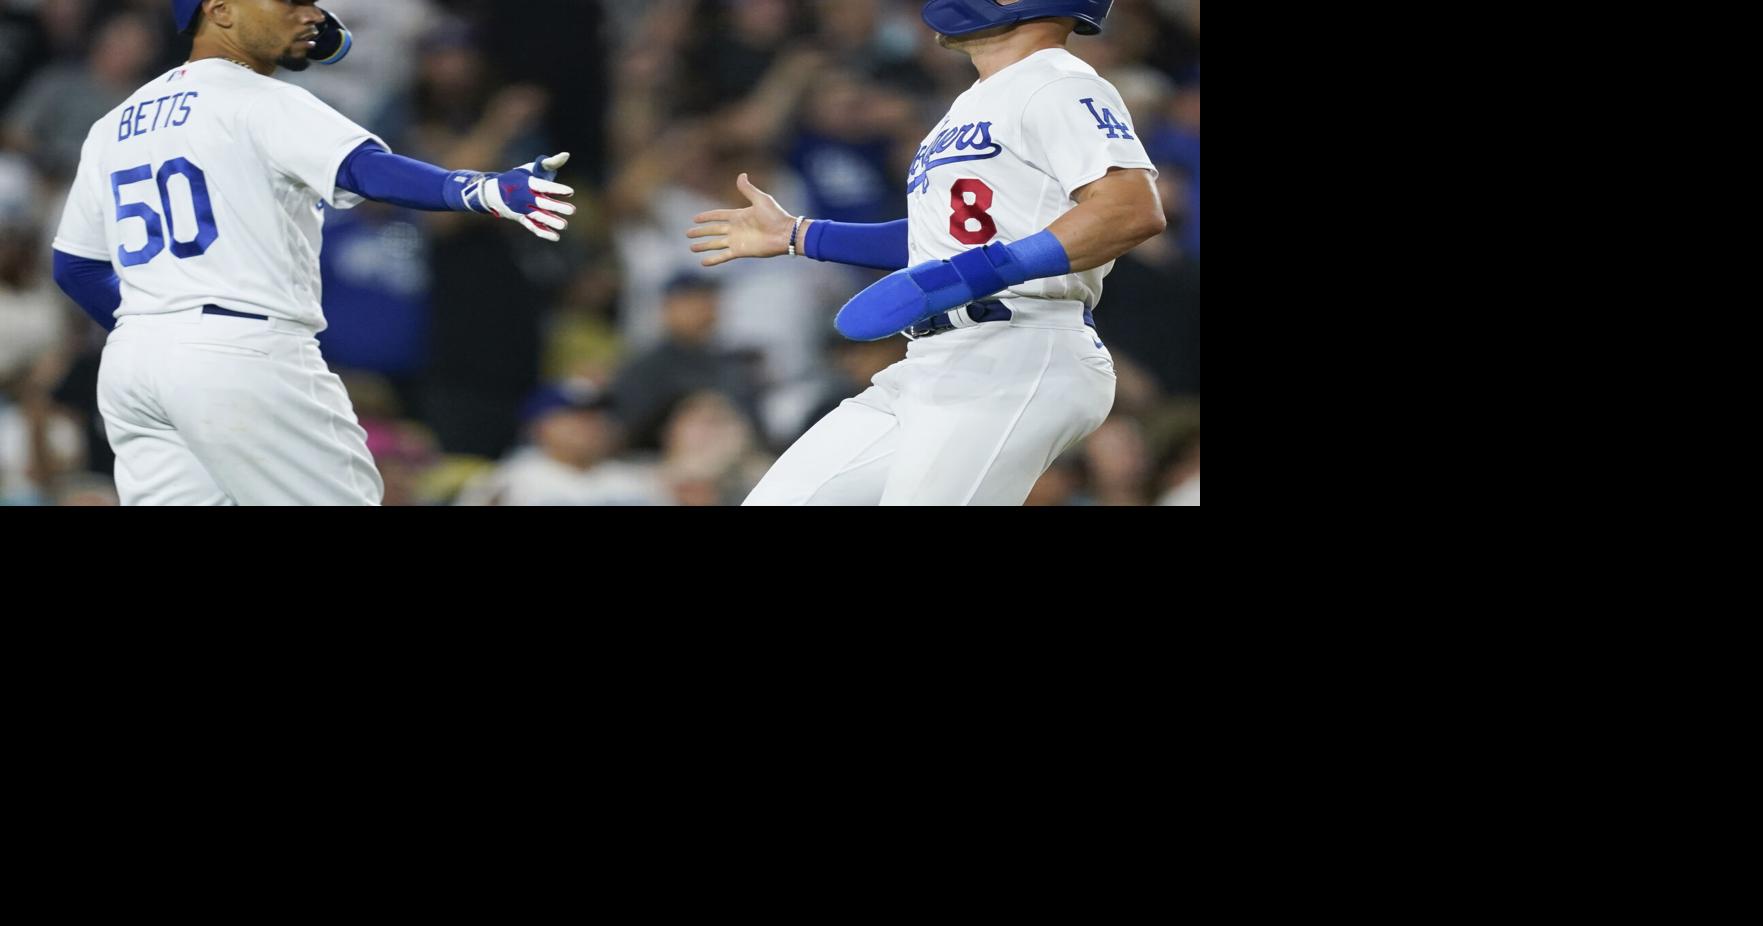 Wild pitch ends Dodgers comeback as they lose to Nationals 7-6 in